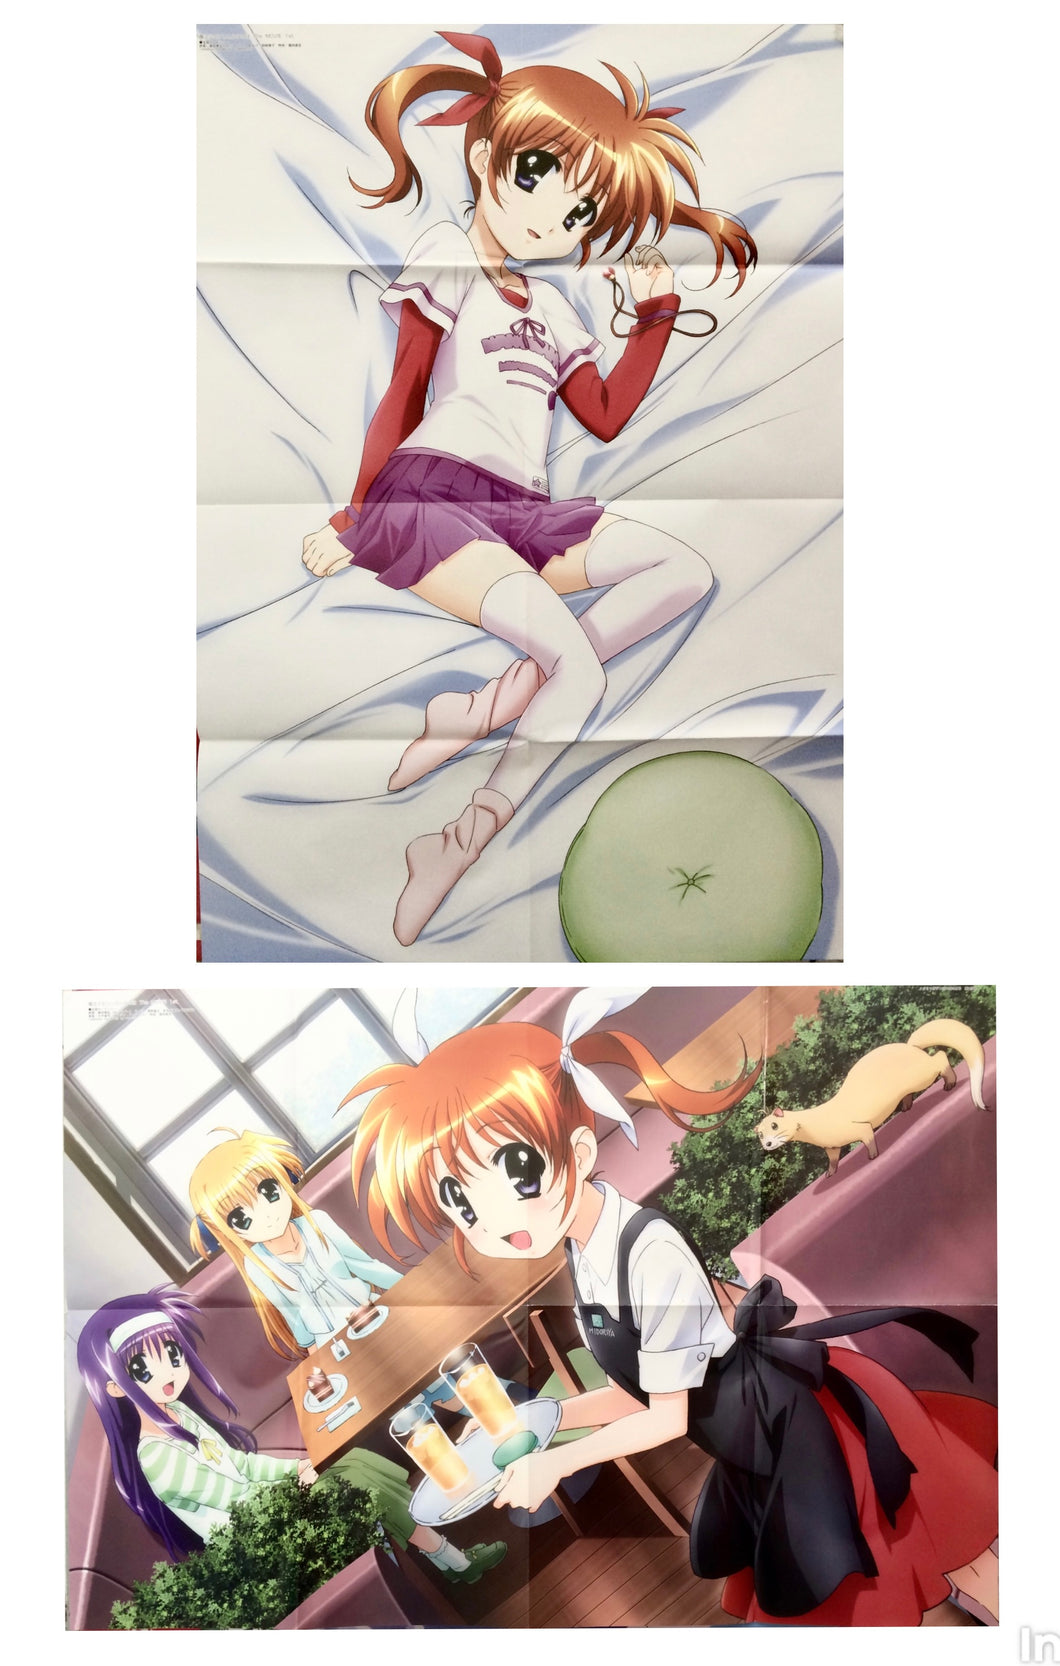 Magical Girl Lyrical Nanoha The Movie 1st - Double-sided B2 Poster - Megami Magazine Appendix